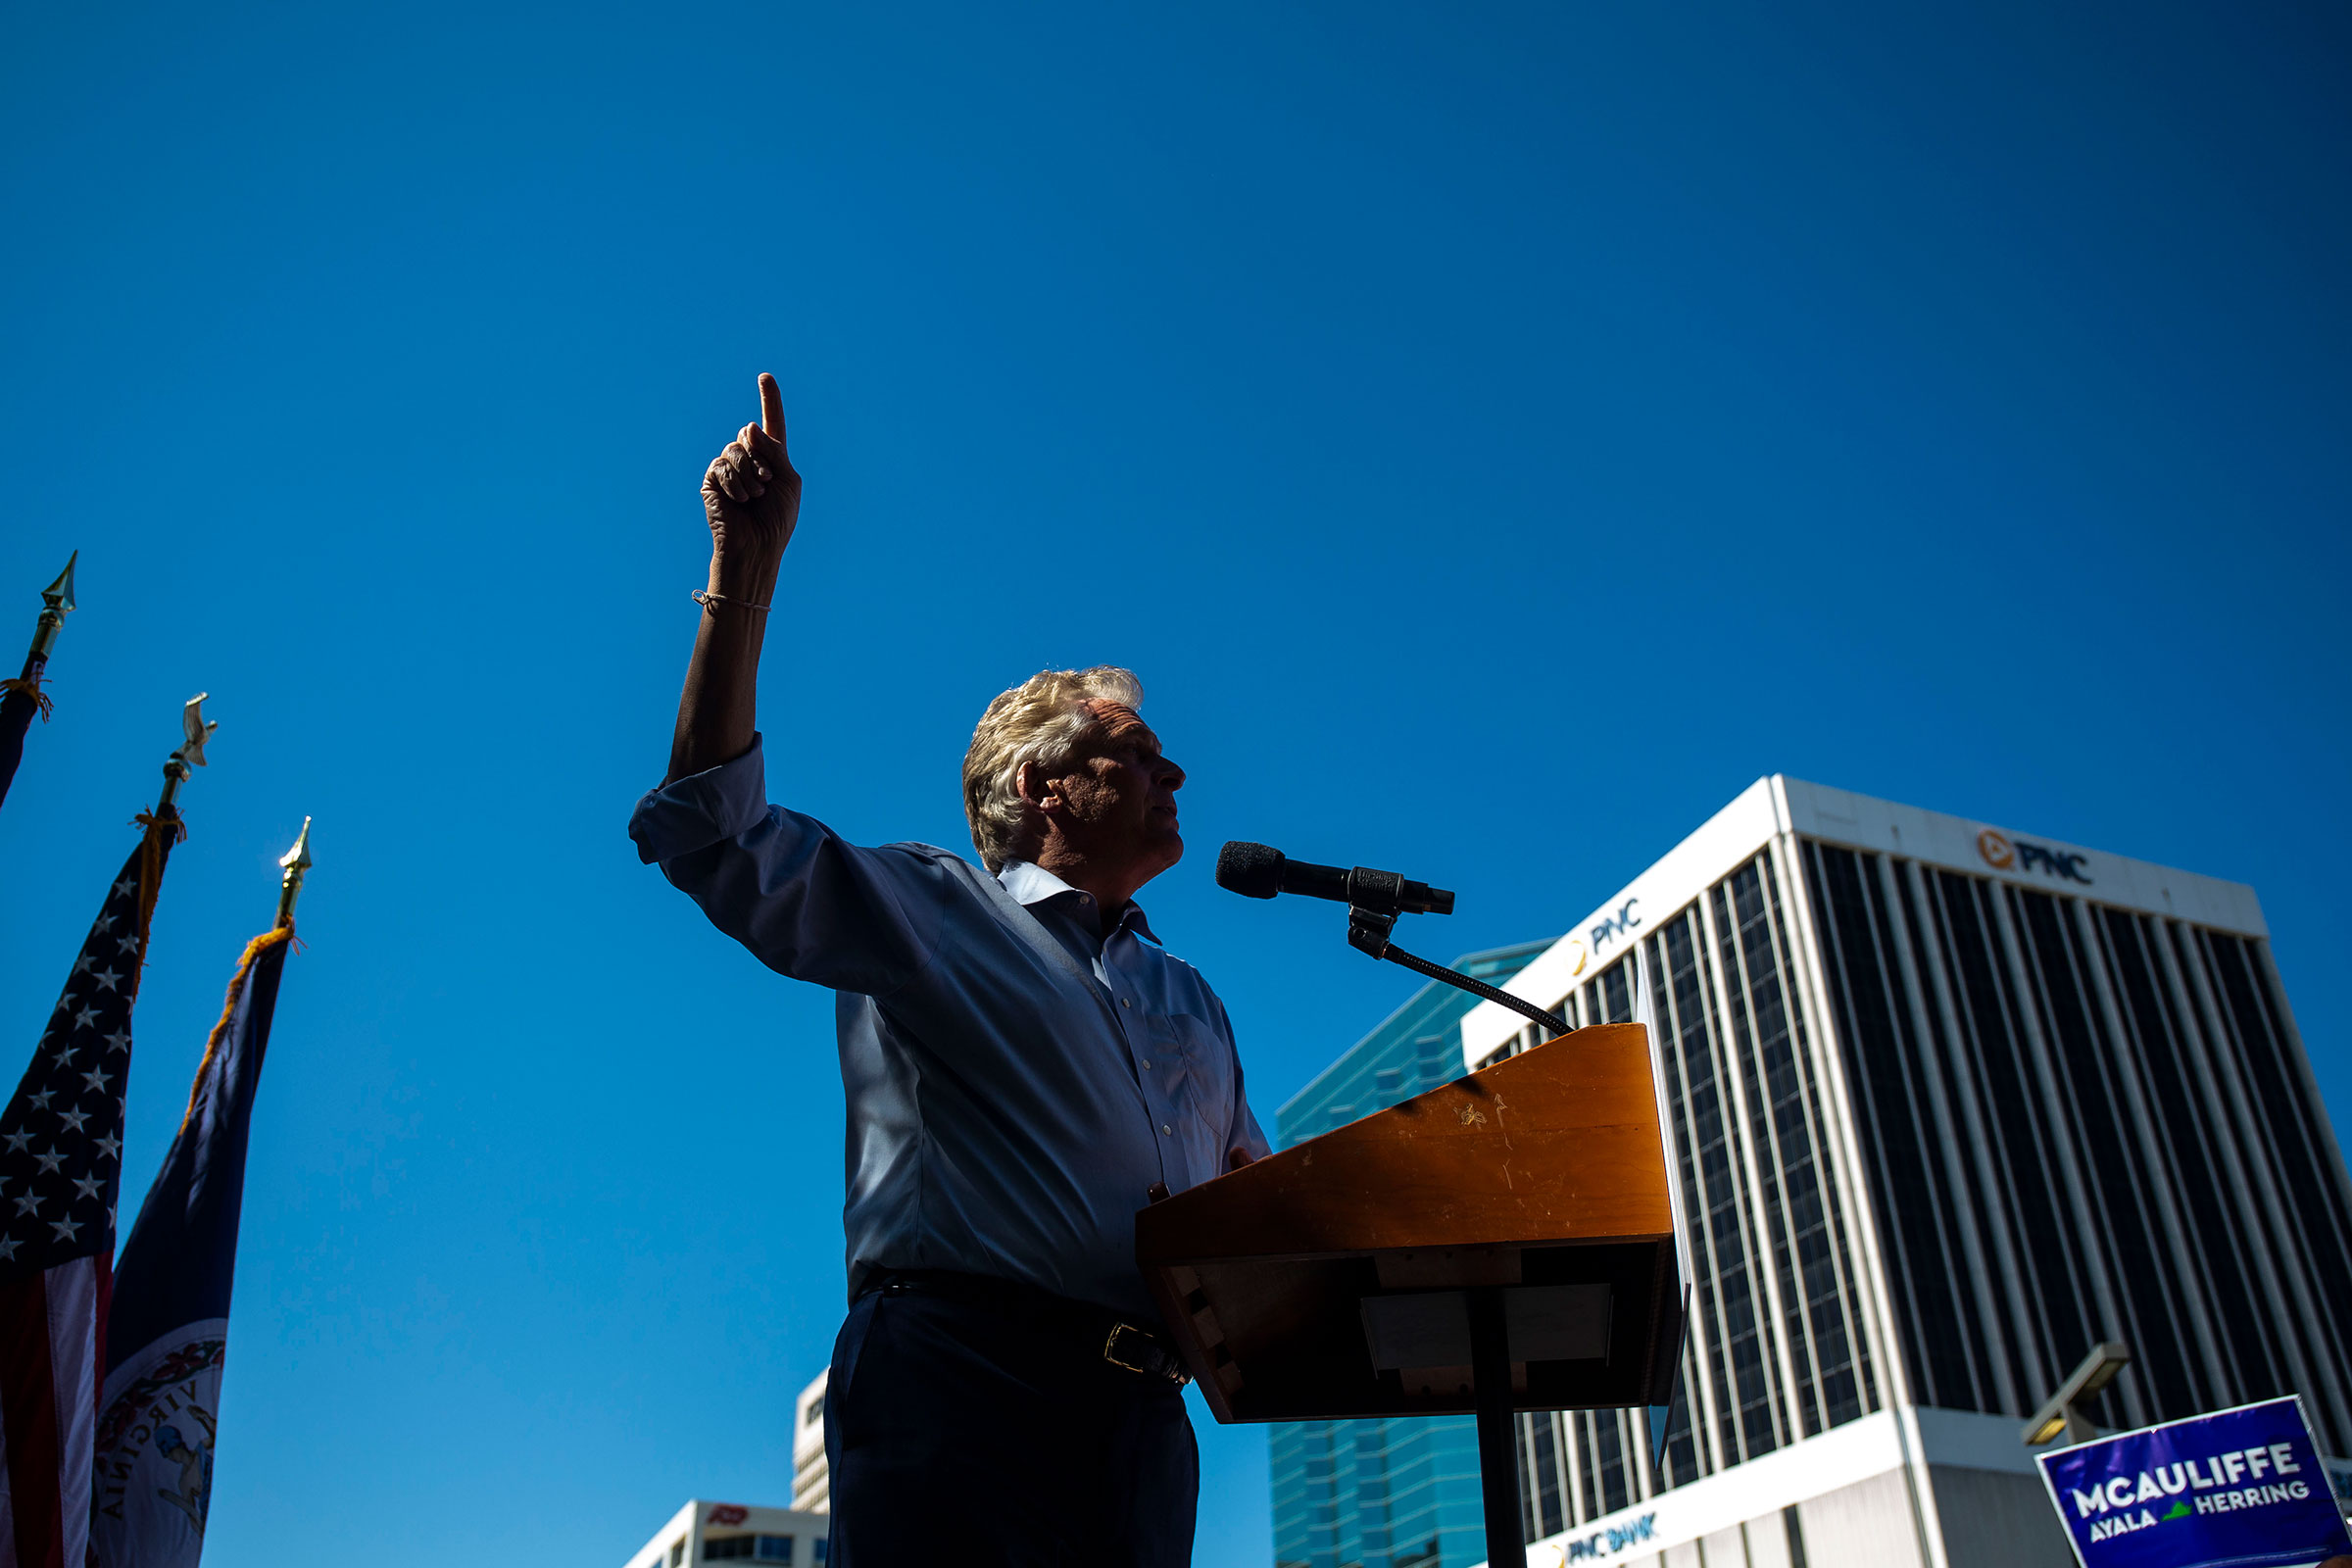 Former Virginia Governor Terry McAuliffe speaks during a Souls to the Polls rally on Oct. 17, 2021 in Norfolk, Va.